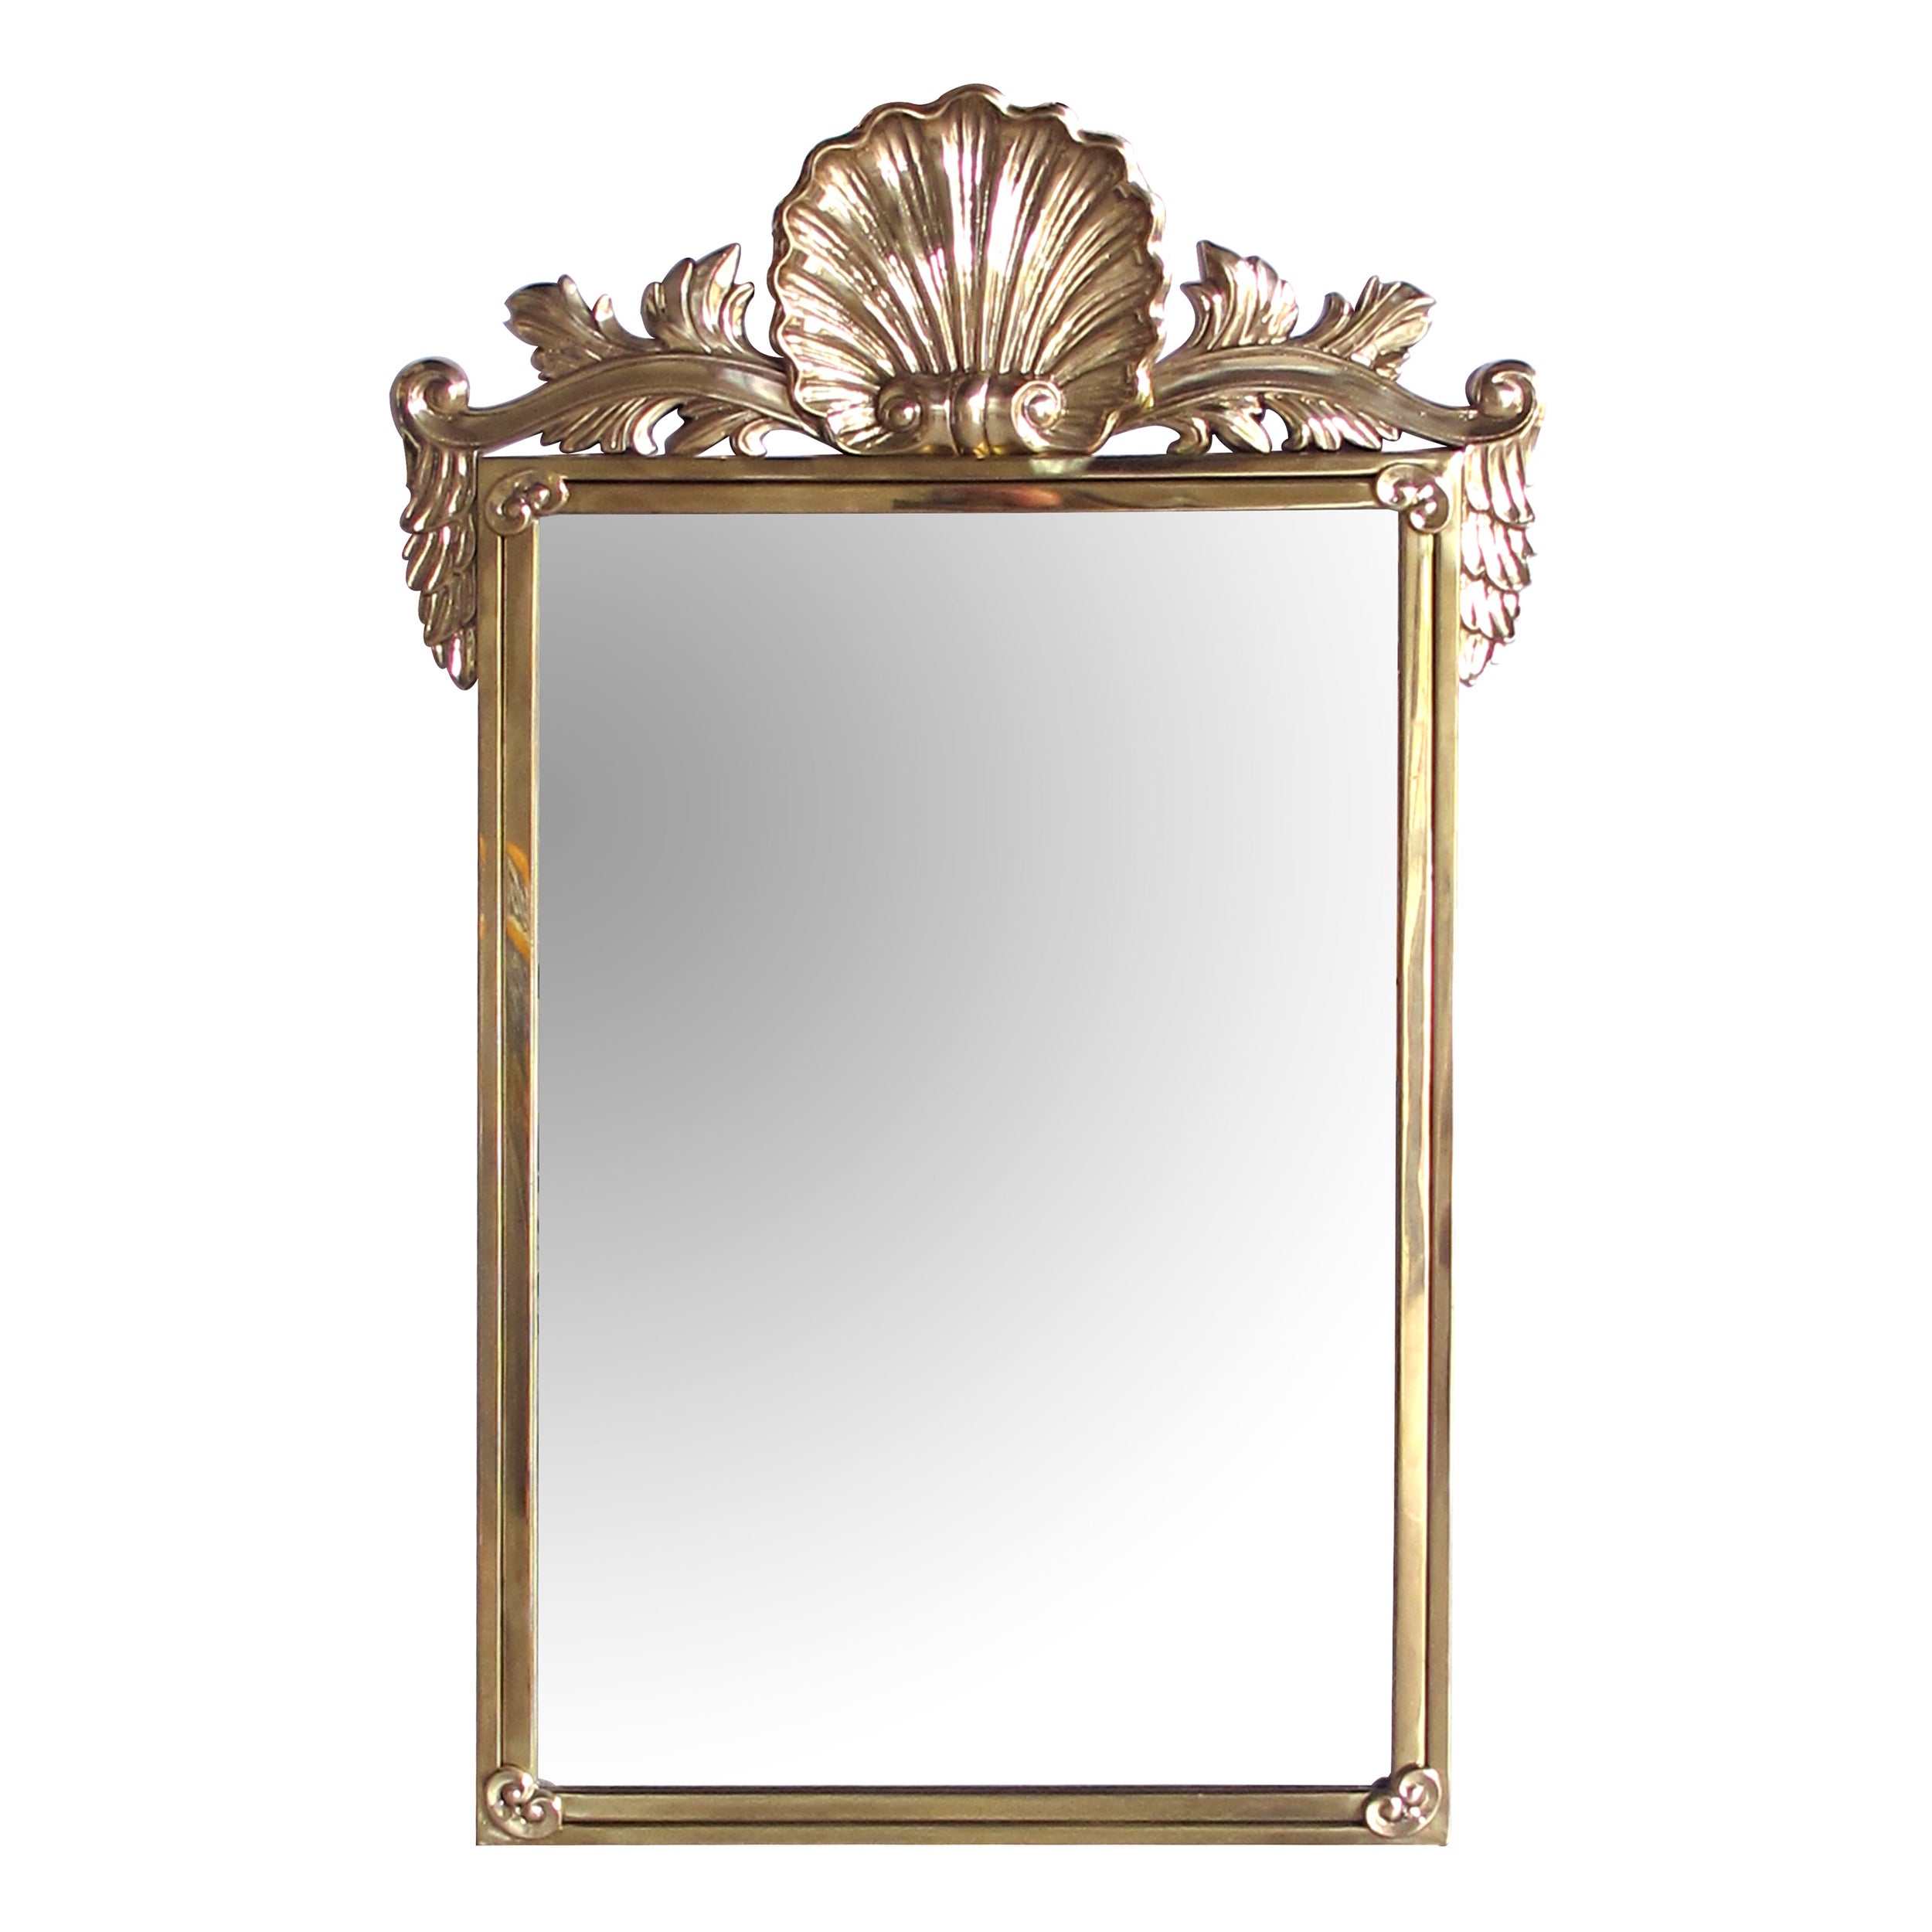 An Italian Hollywood Regency Solid Brass Mirror with Over-scaled Shell Crest For Sale